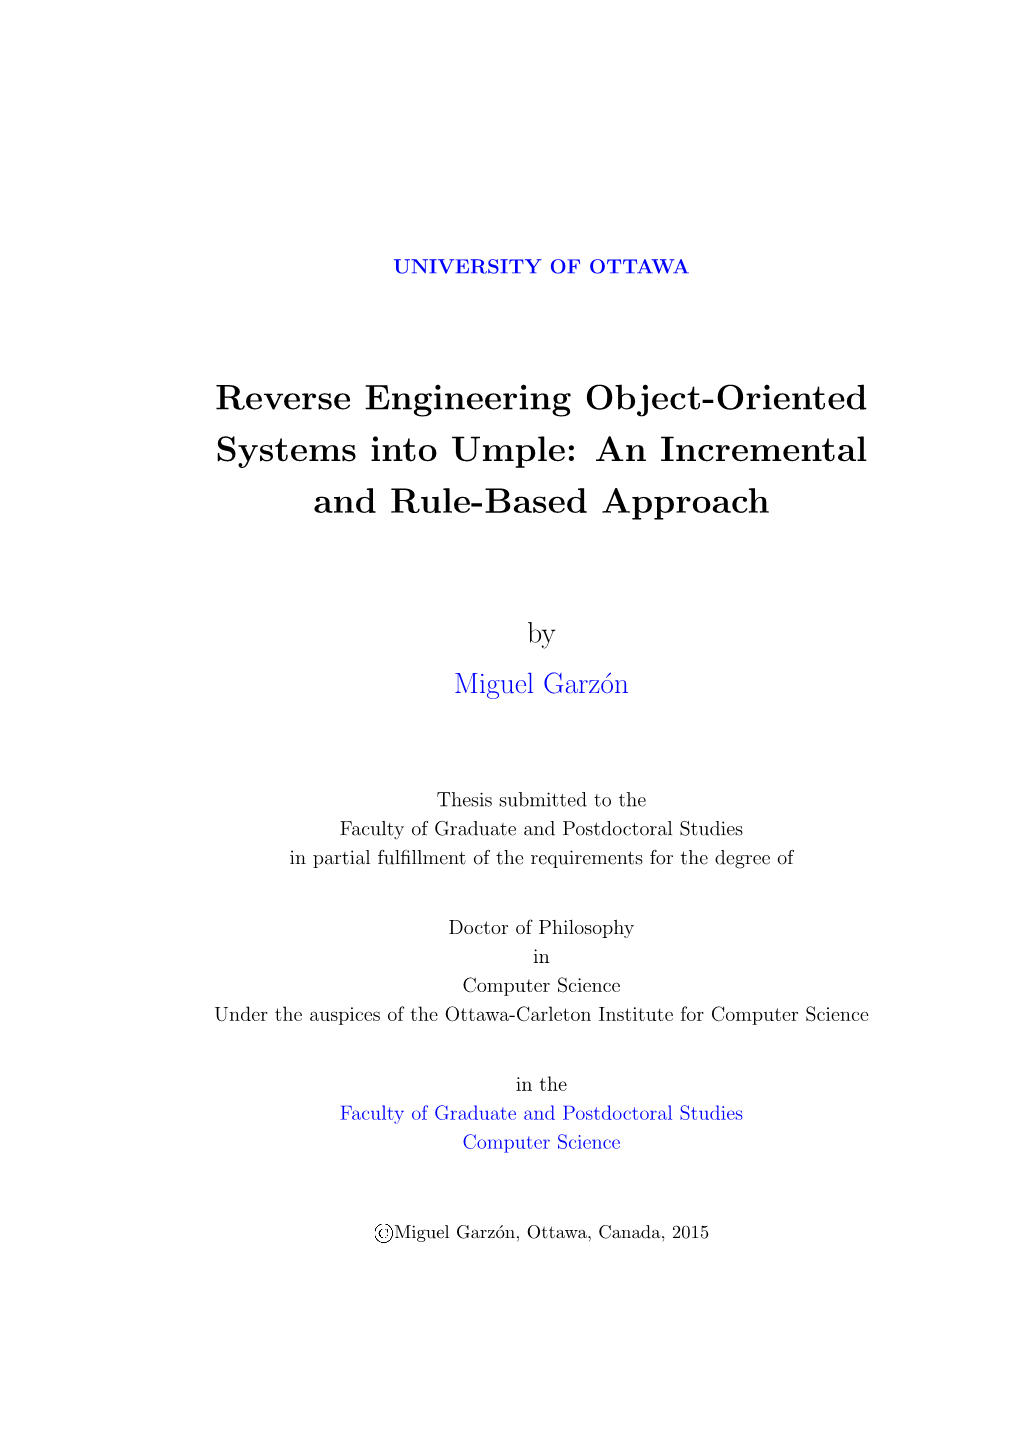 Reverse Engineering Object-Oriented Systems Into Umple: an Incremental and Rule-Based Approach